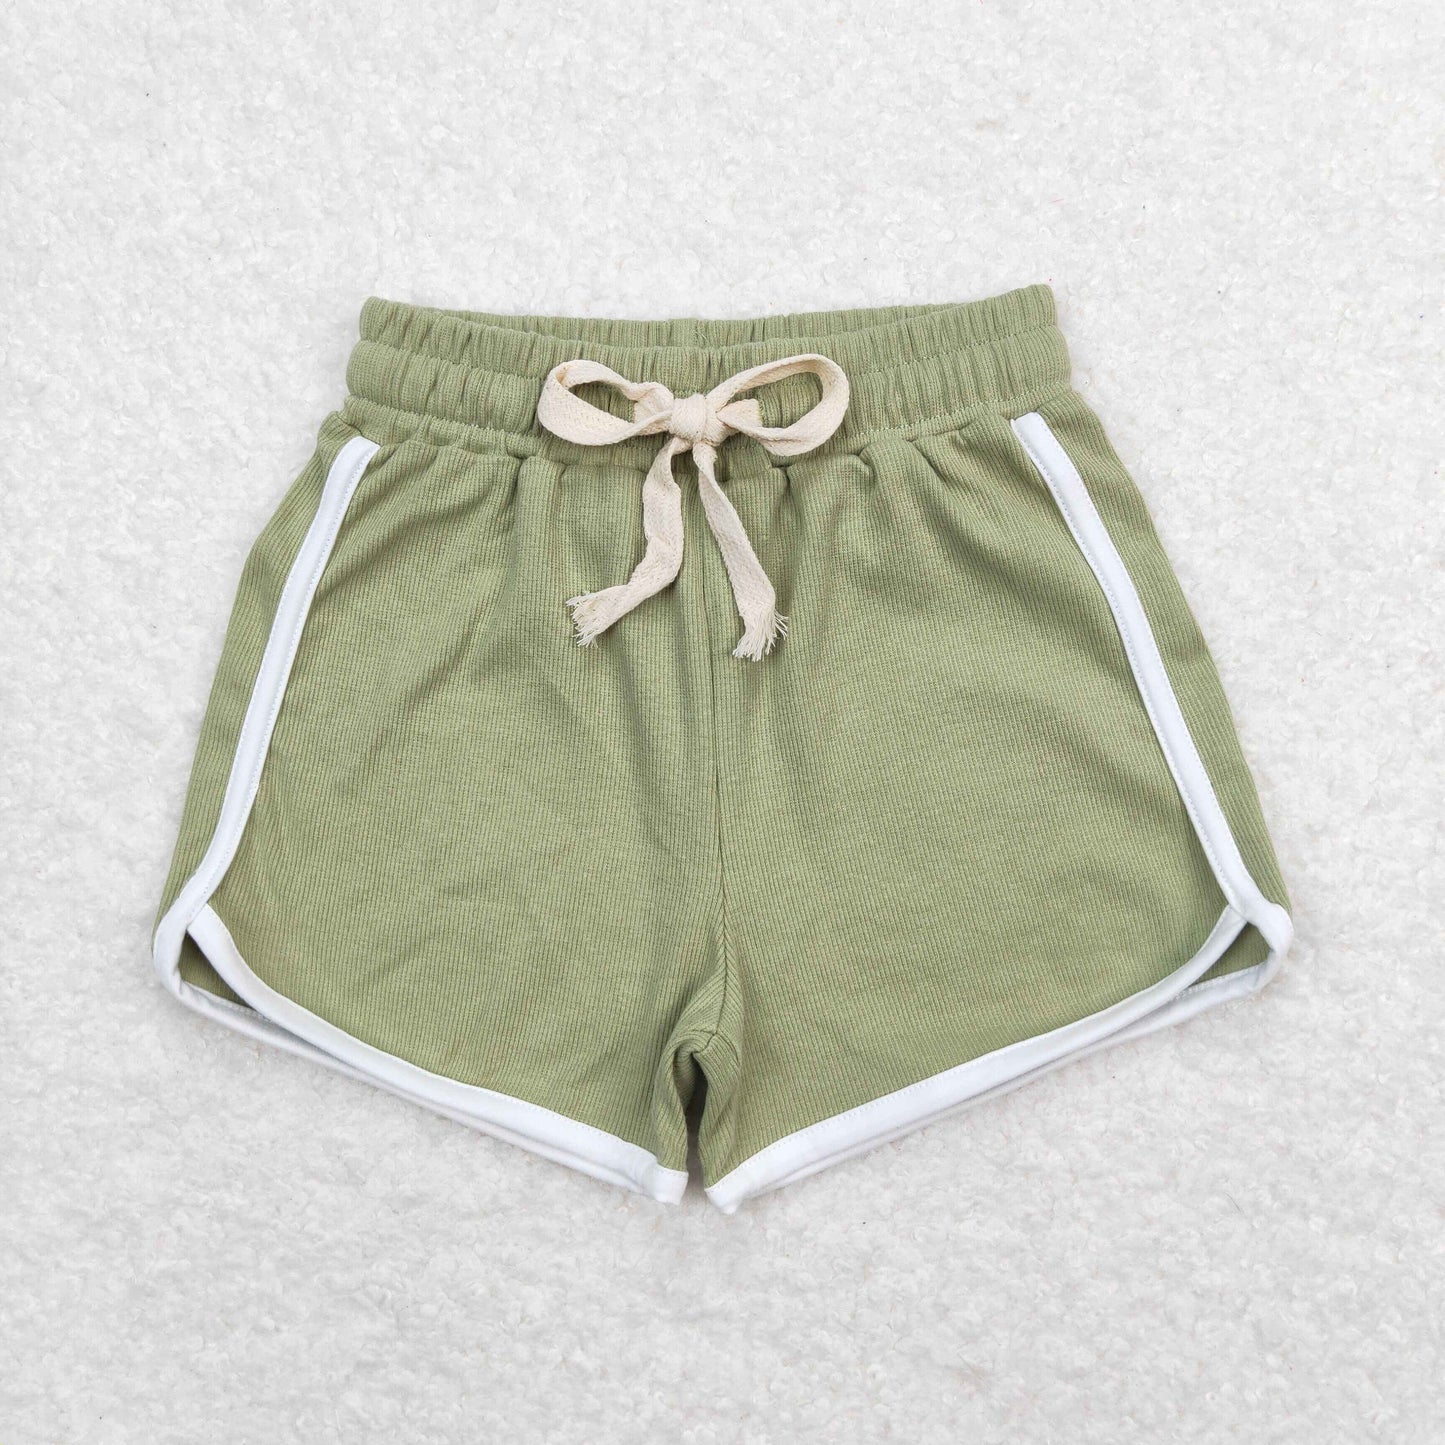 solid olive color cotton echt mulberry shorts